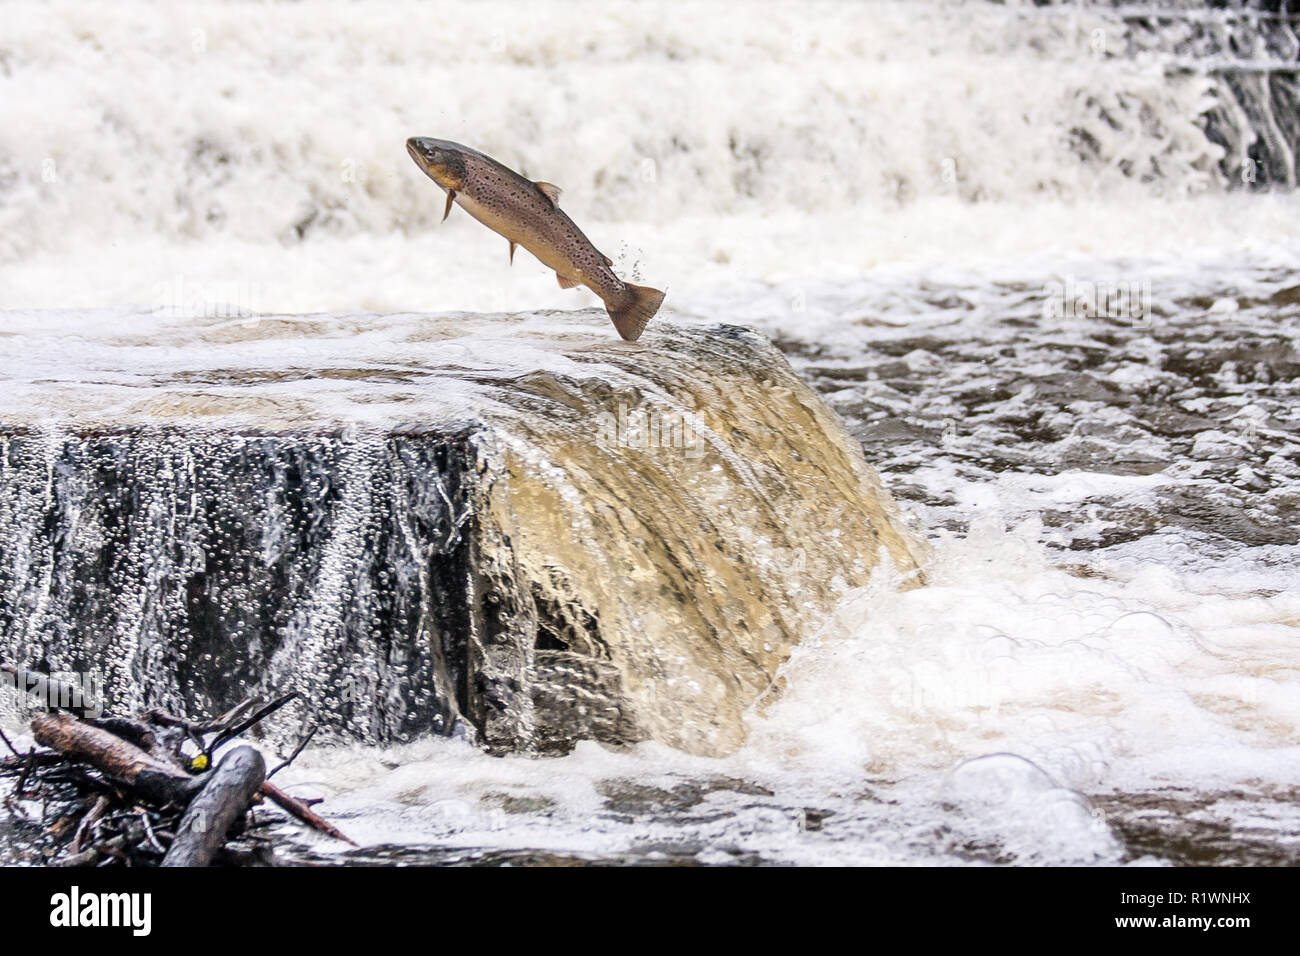 Leaping Sea Trout on its migration to the spawning beds upstream Stock Photo